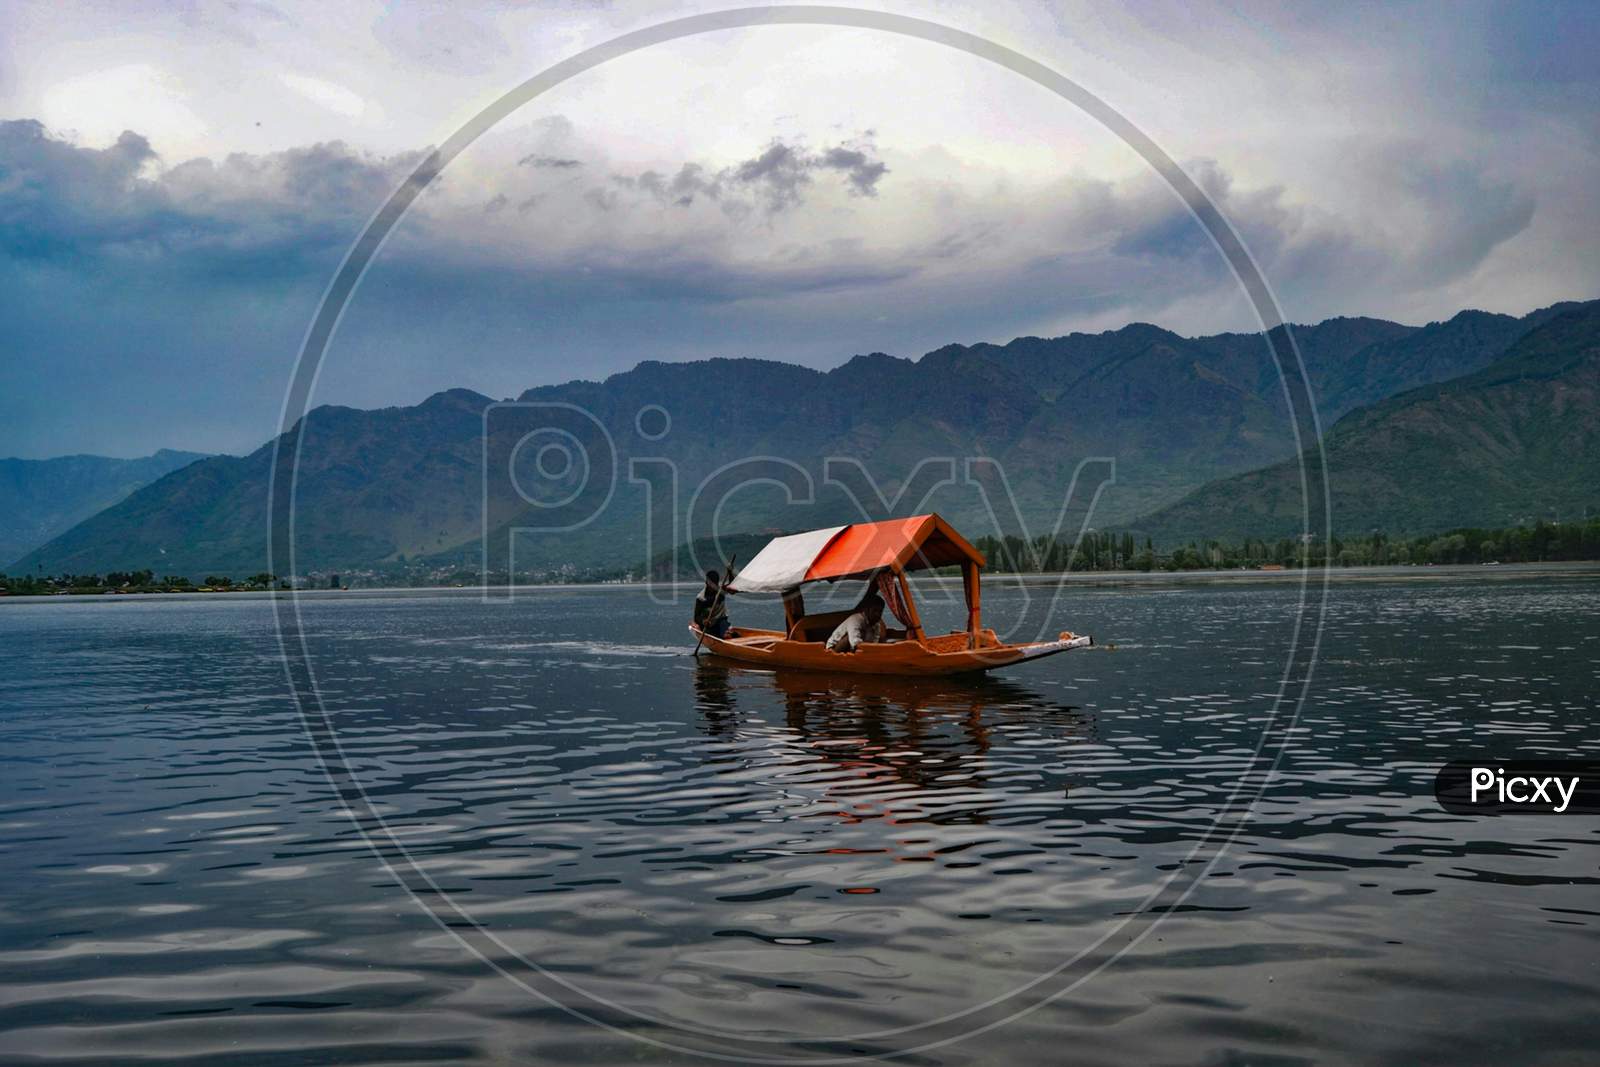 Jammu and Kashmir,Boat in a lake under a cloudy sky